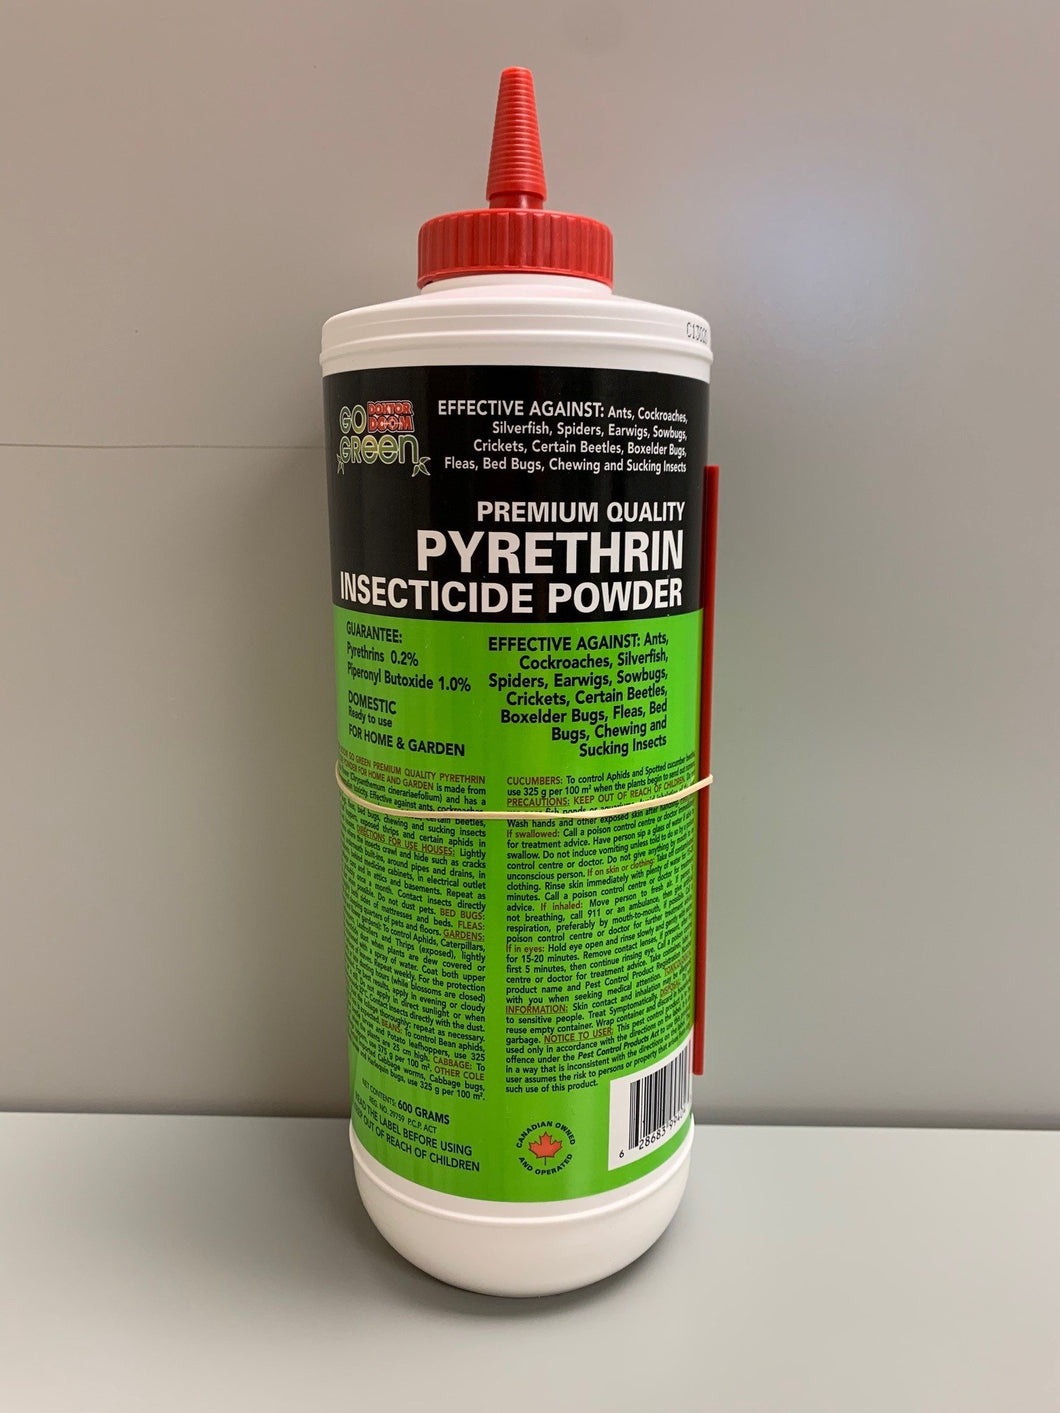 Go Green Premium Quality Pyrethrin Insecticide Powder